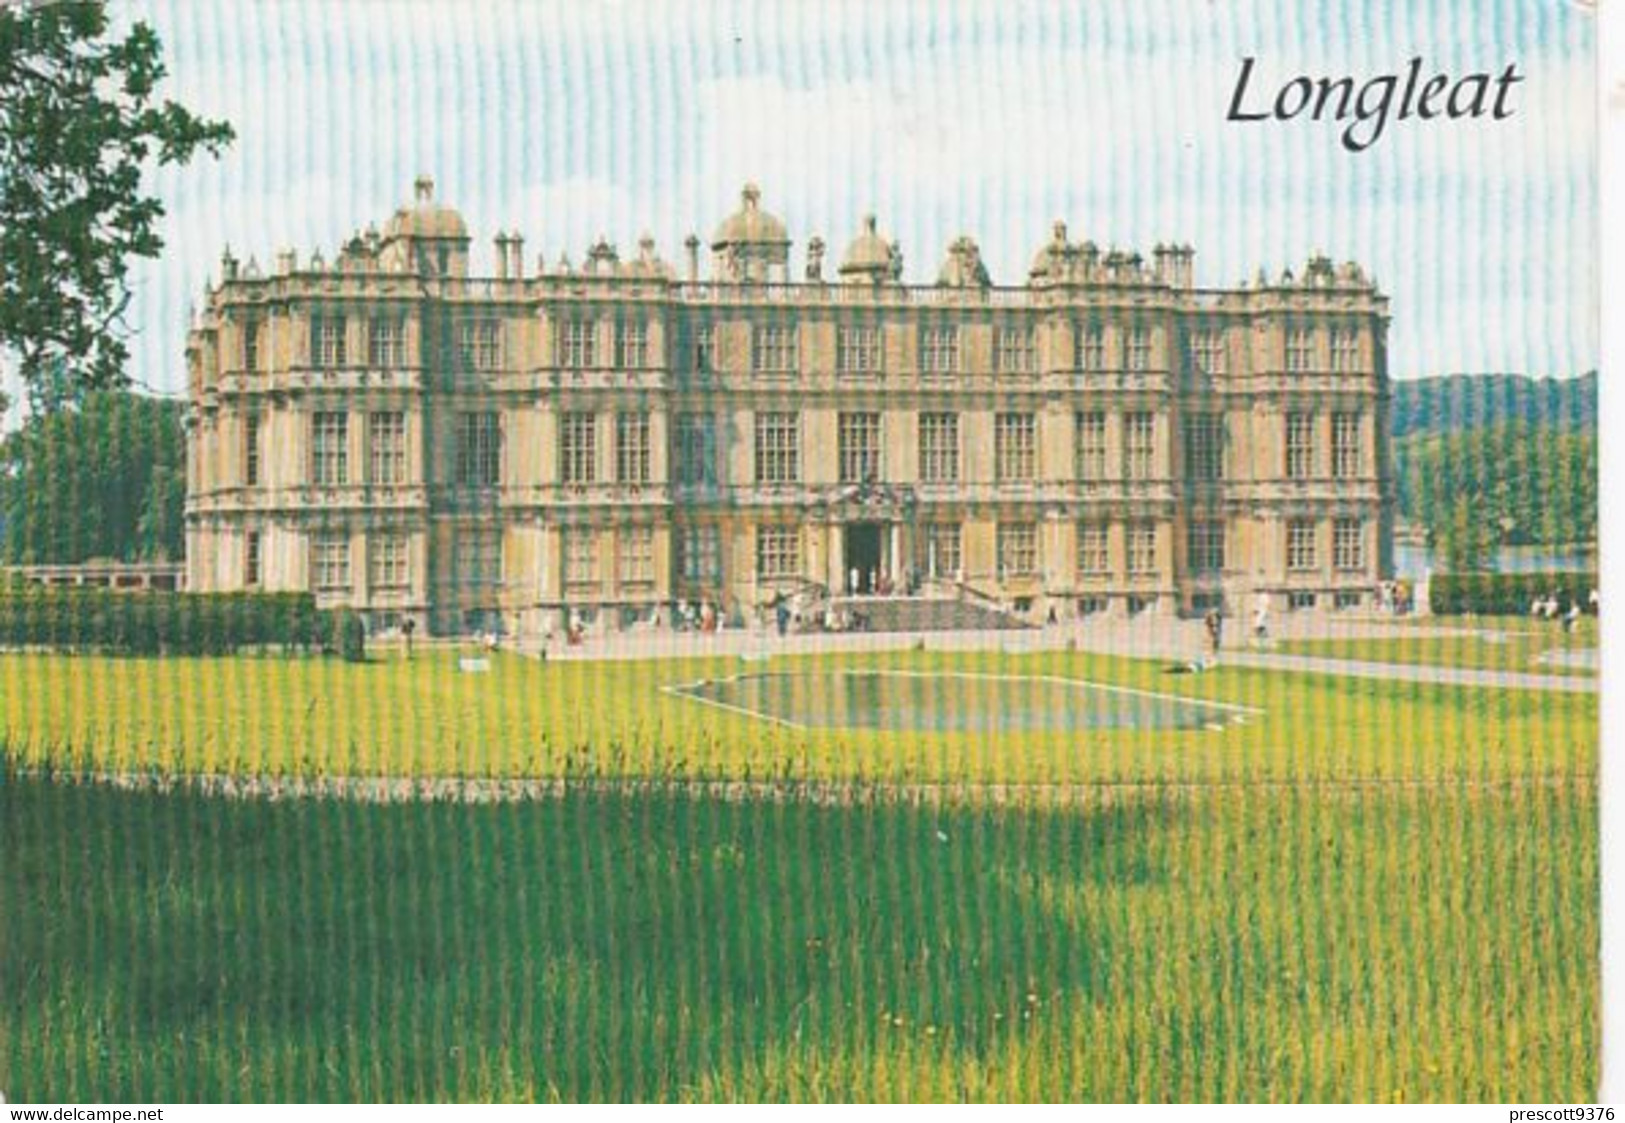 Longleat - Unused Postcard - Middlesex - Middlesex